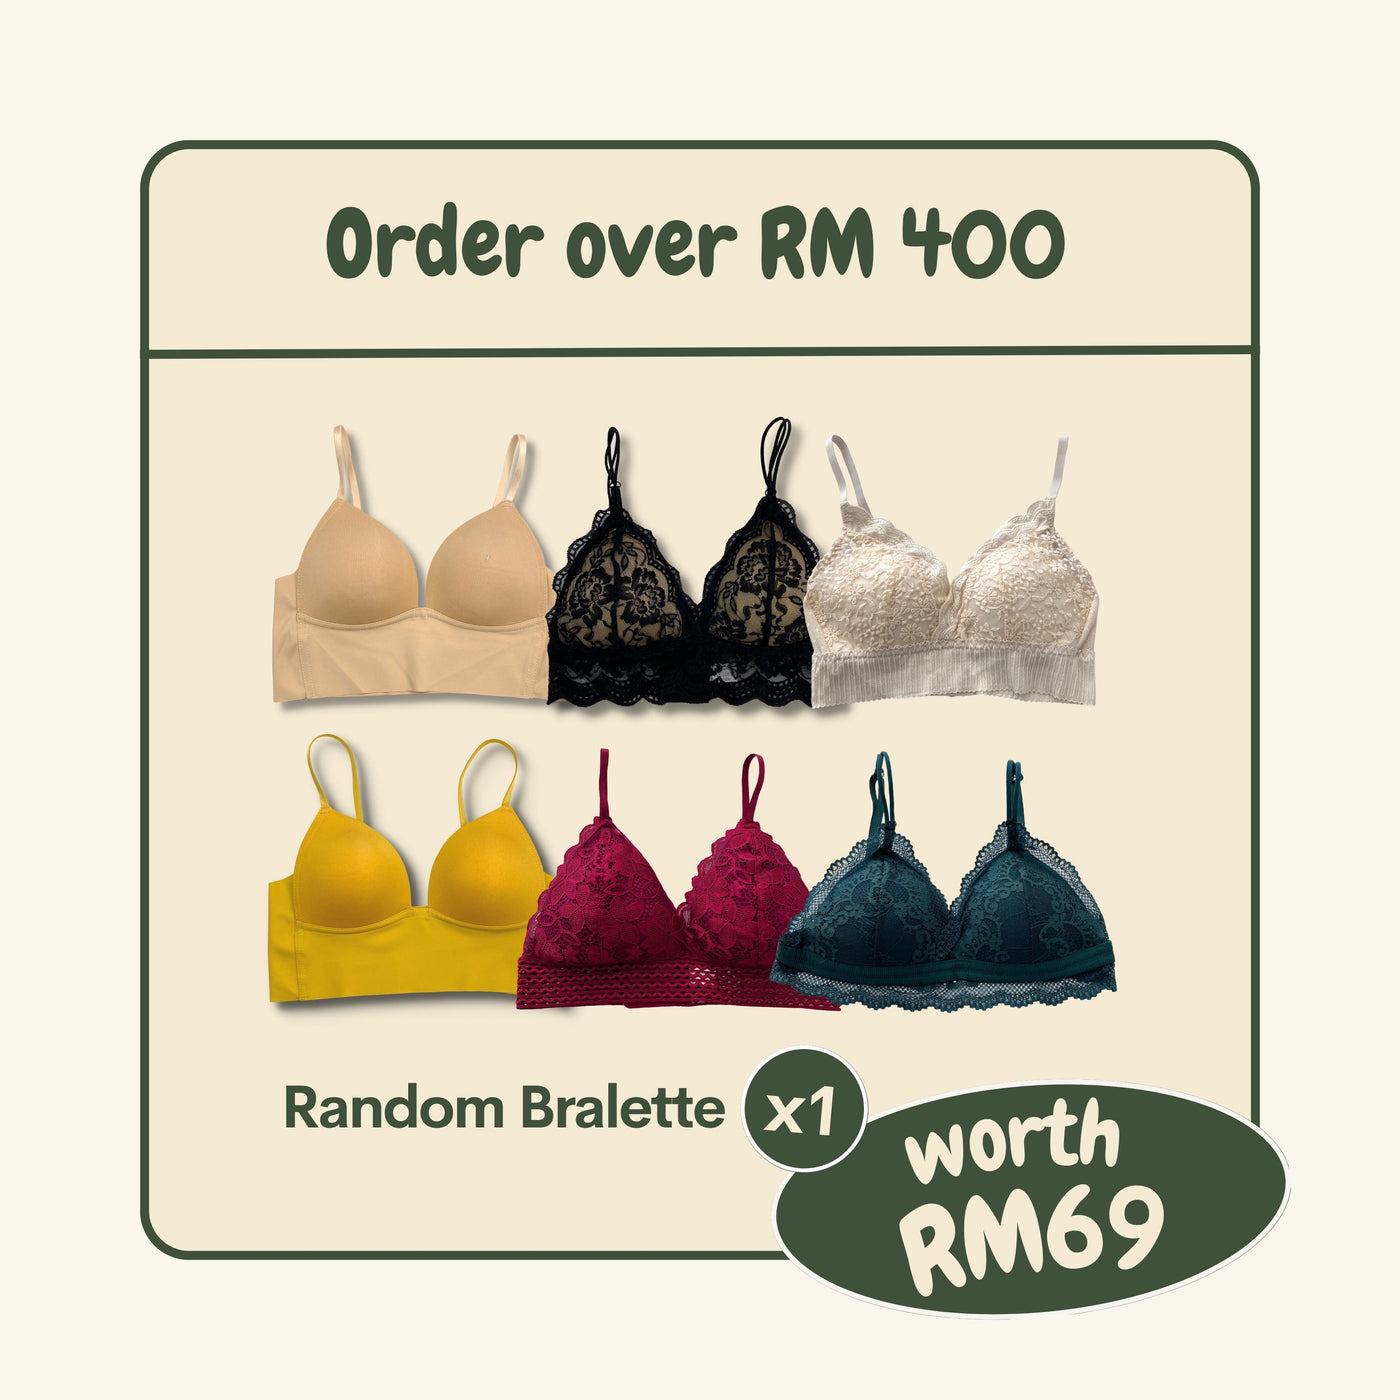 Limited Free Bralette (Spent RM400) (While Stock Last)